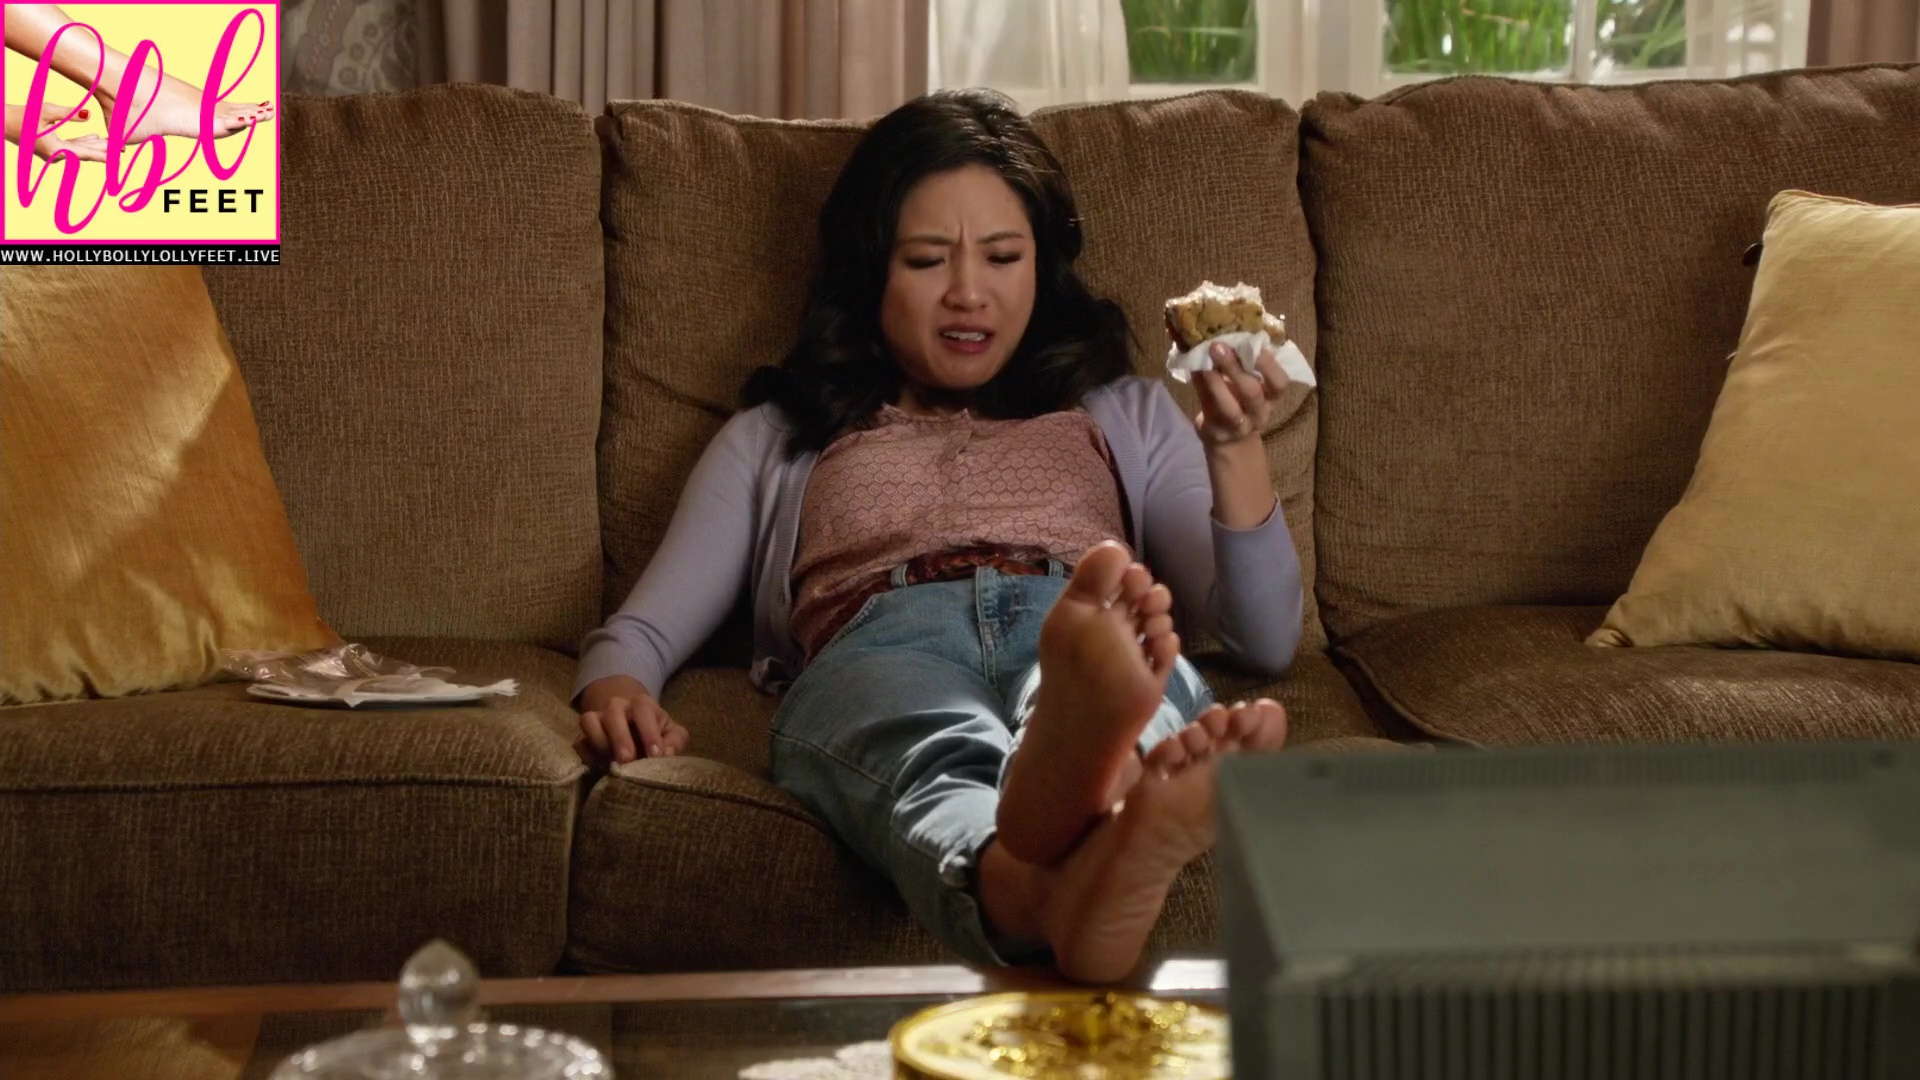 constance-wu-feet-soles-fresh-off-the-boat-s3-ep11-03